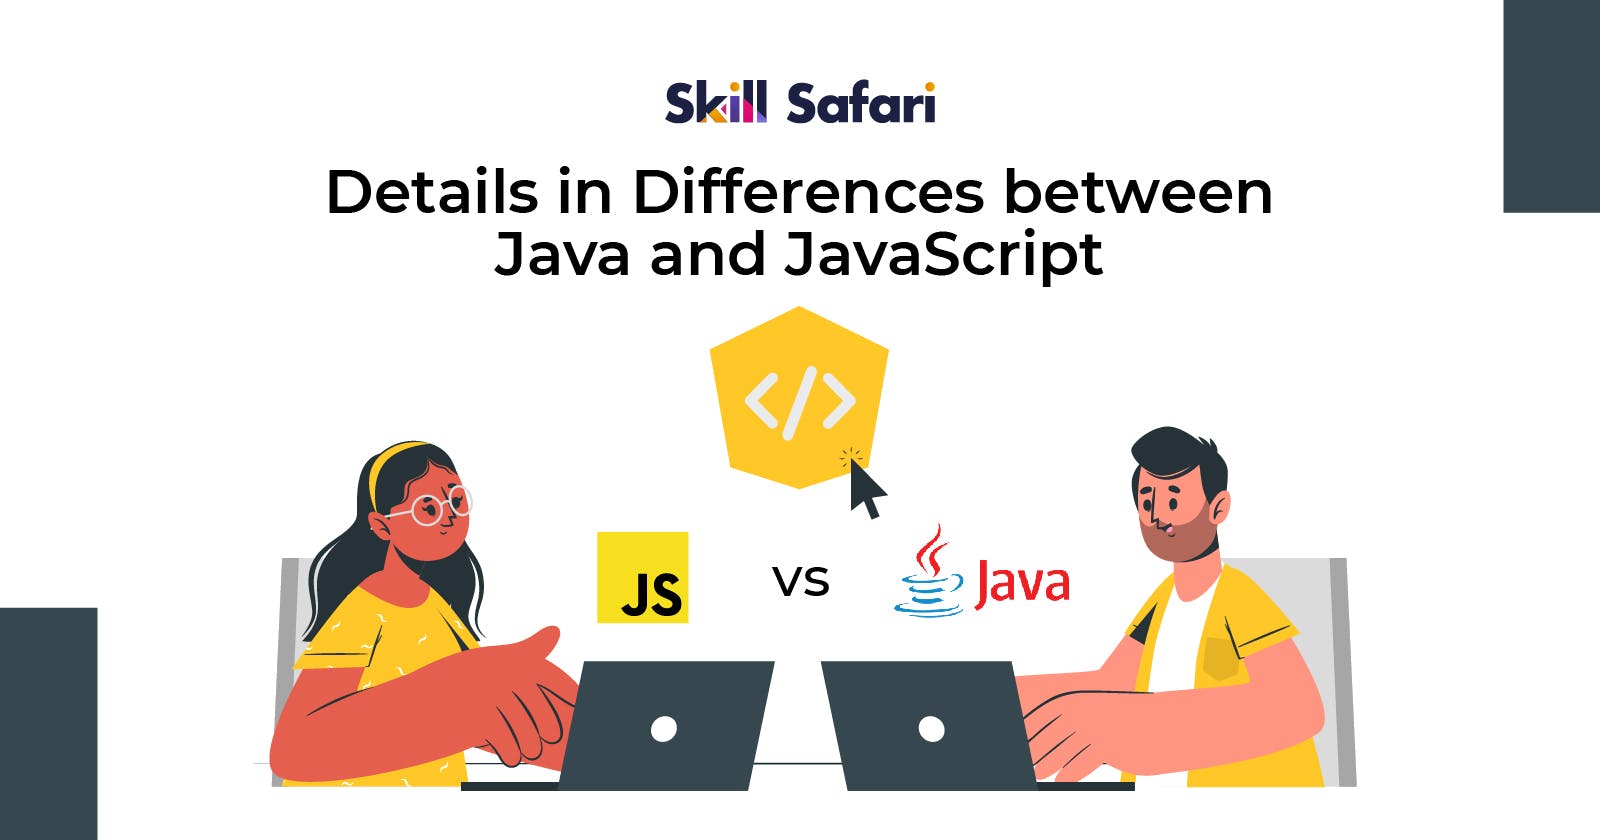 Details in Differences between Java and JavaScript